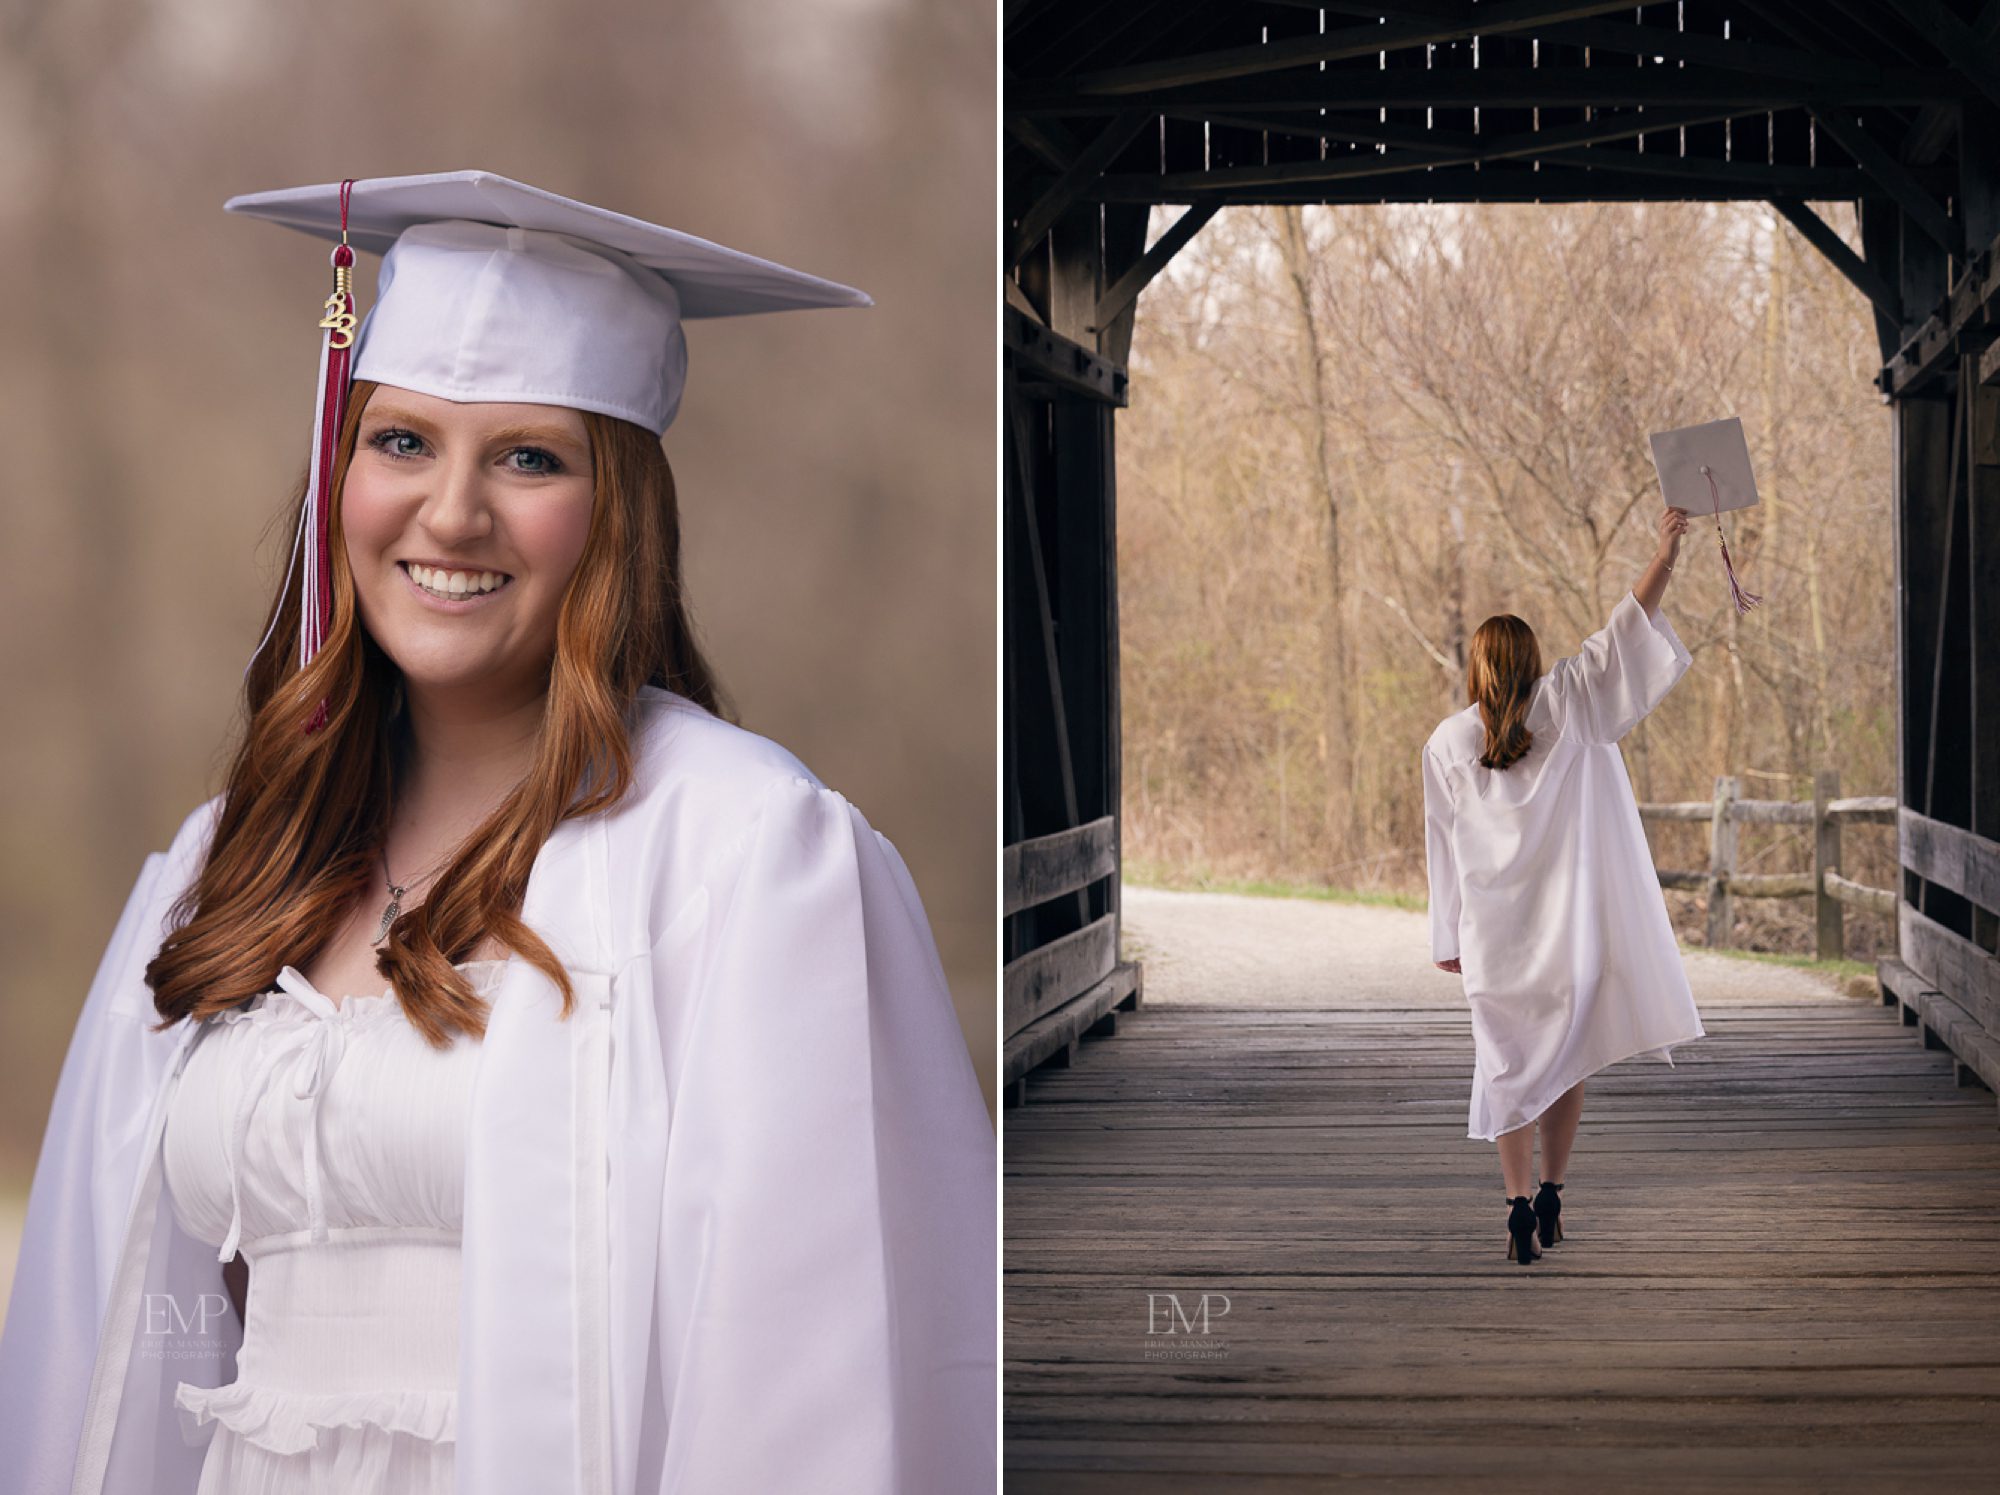 High school senior girl in cap and gown 